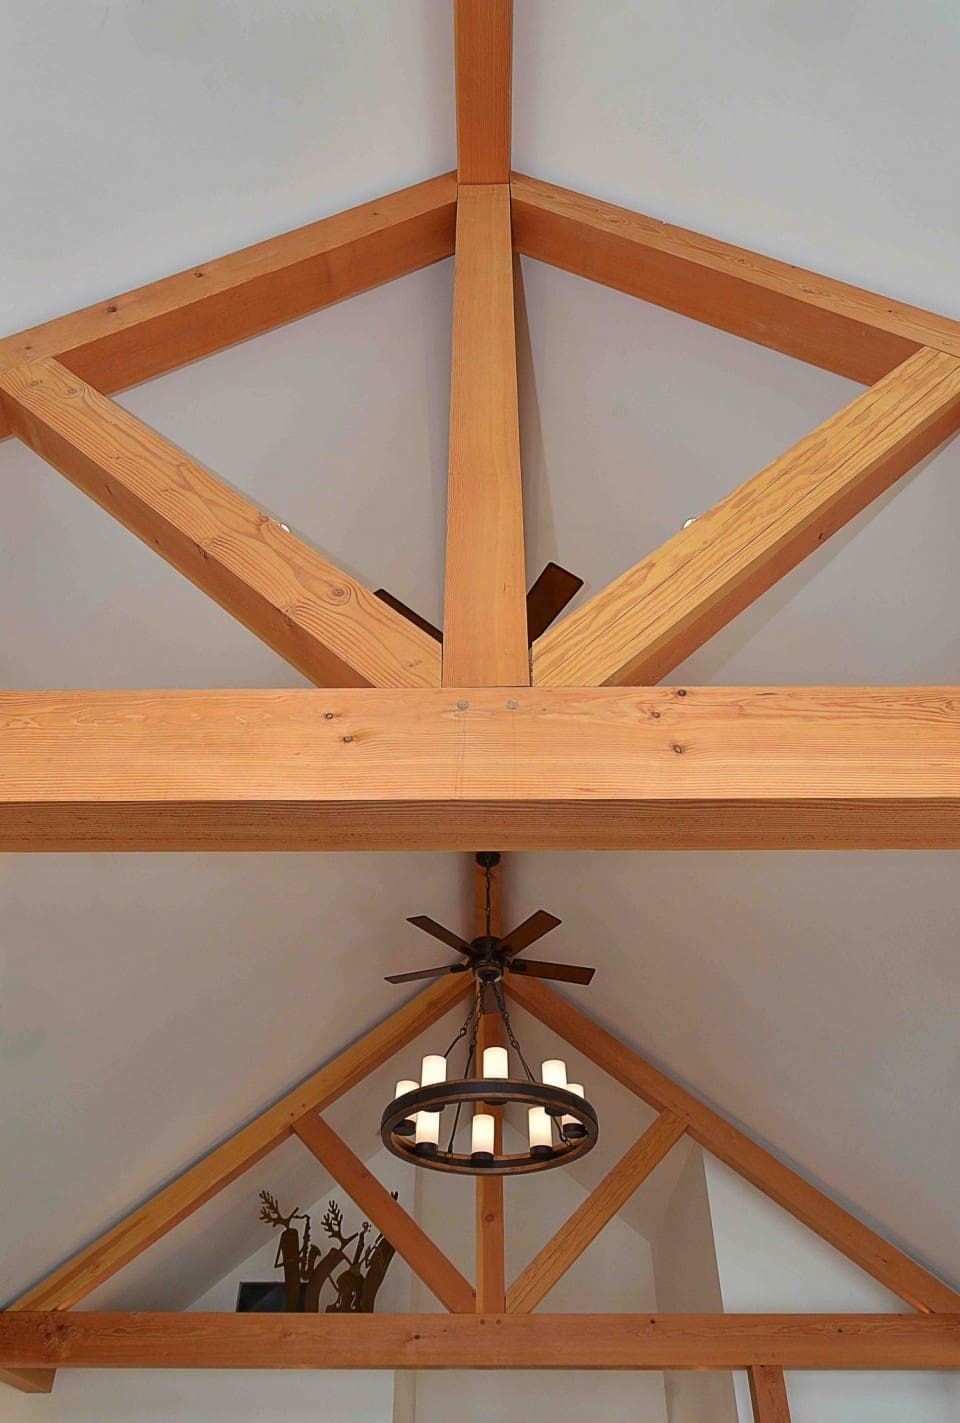 Beam structure inside a timber frame home